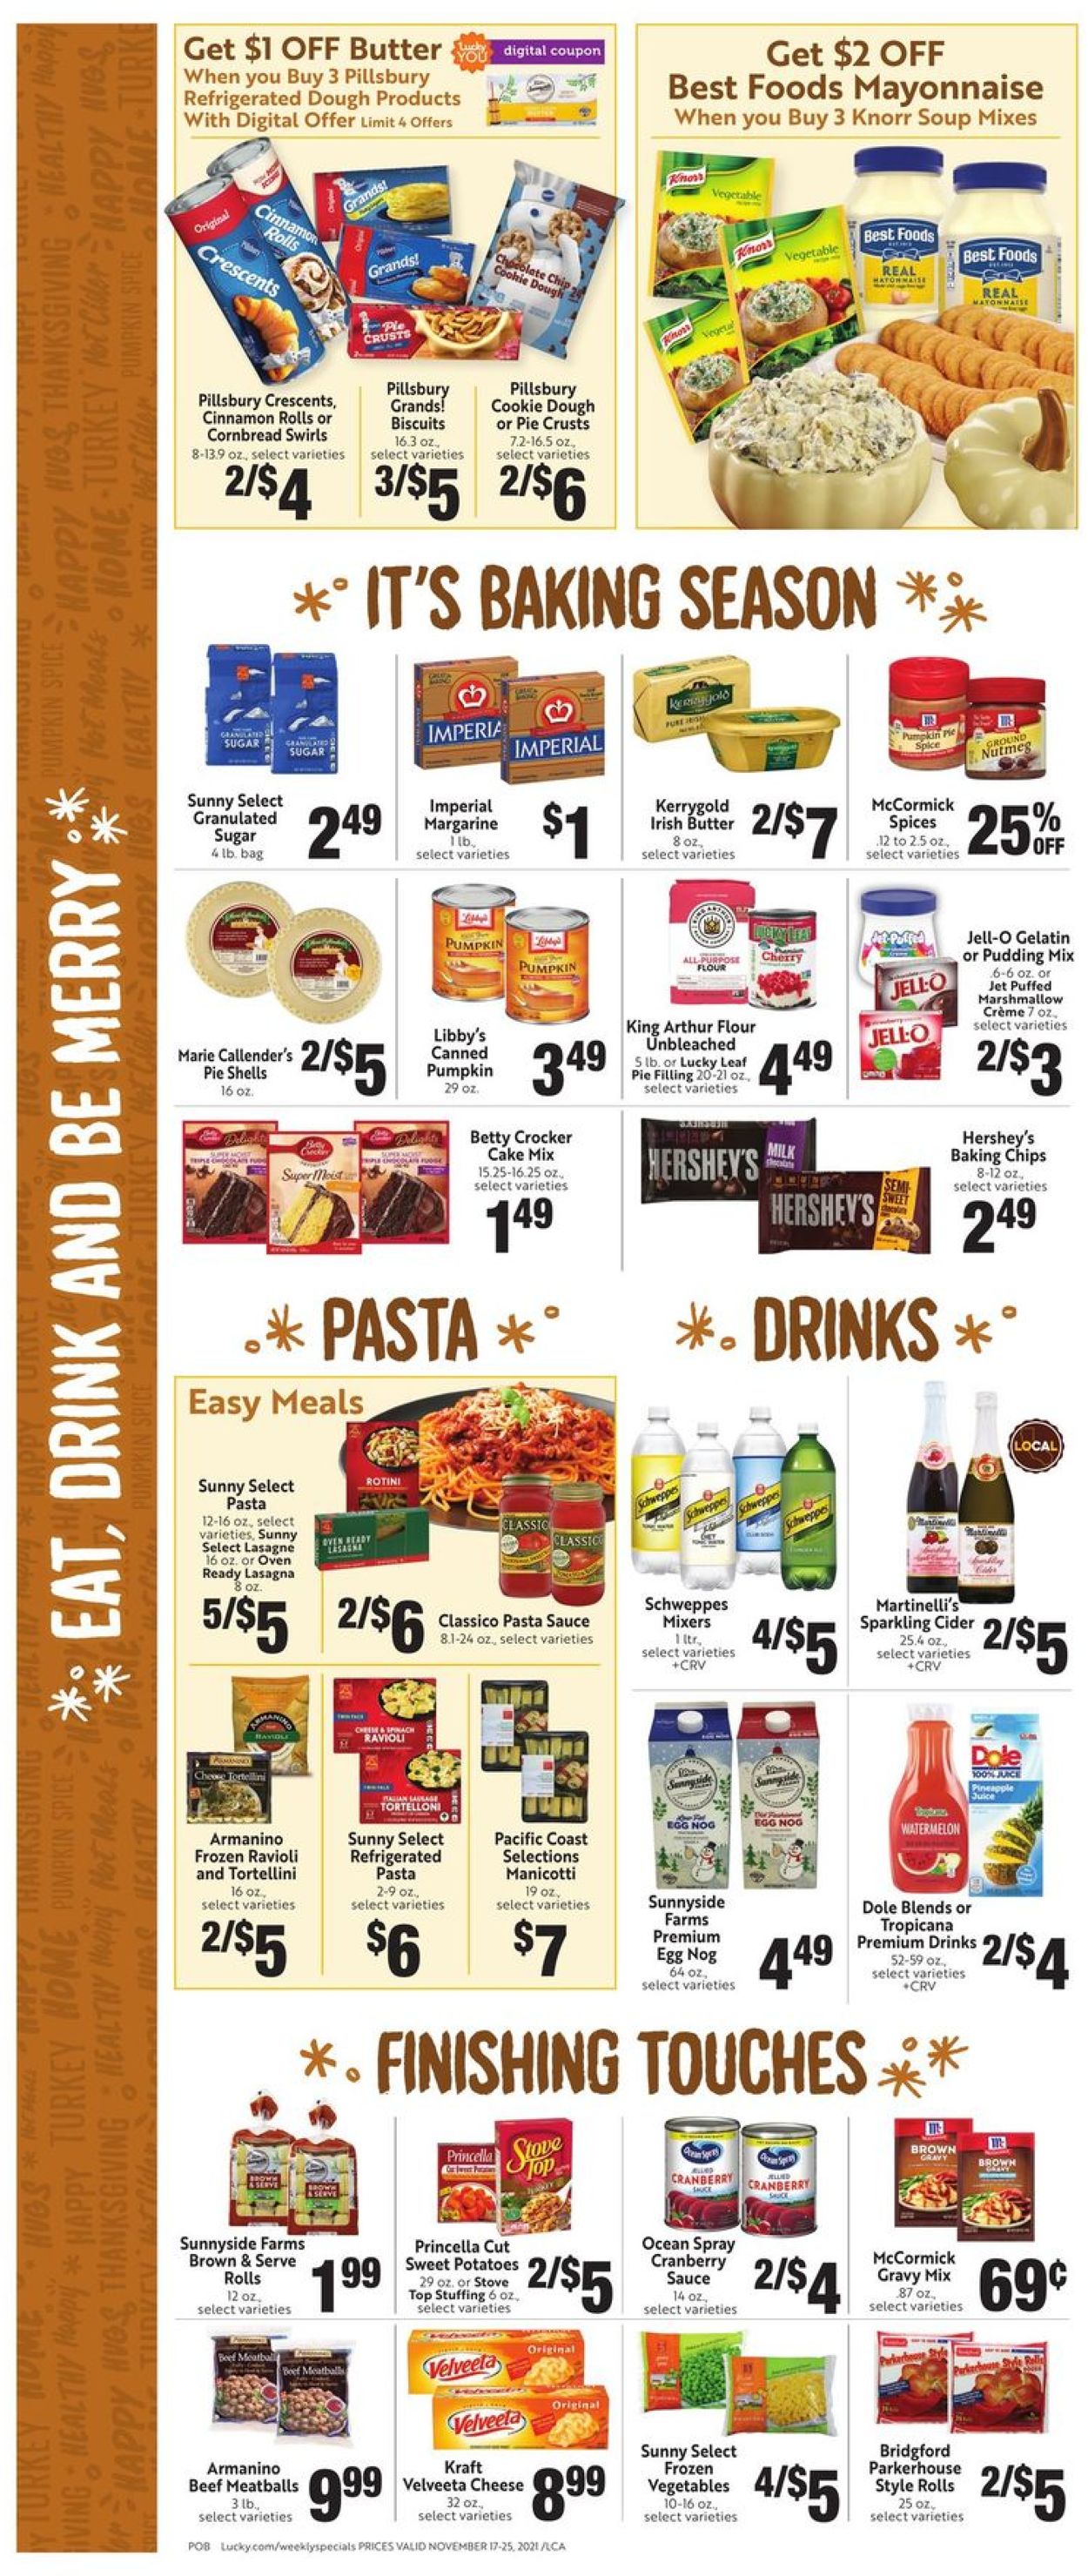 Lucky Supermarkets Ad from 11/17/2021